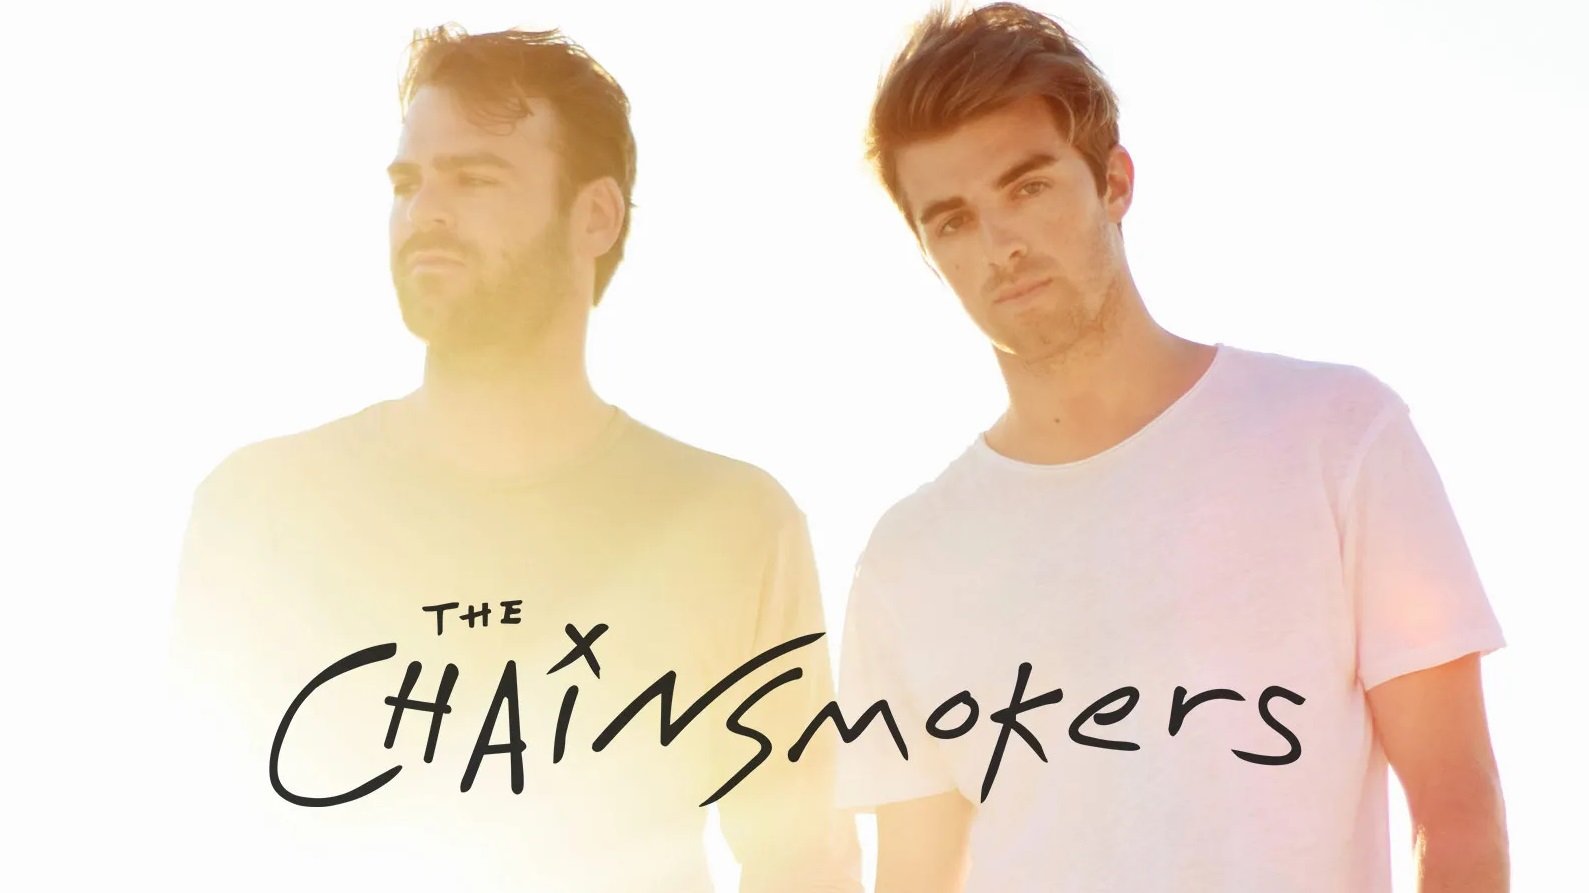 The Chainsmokers Merch - Official Store